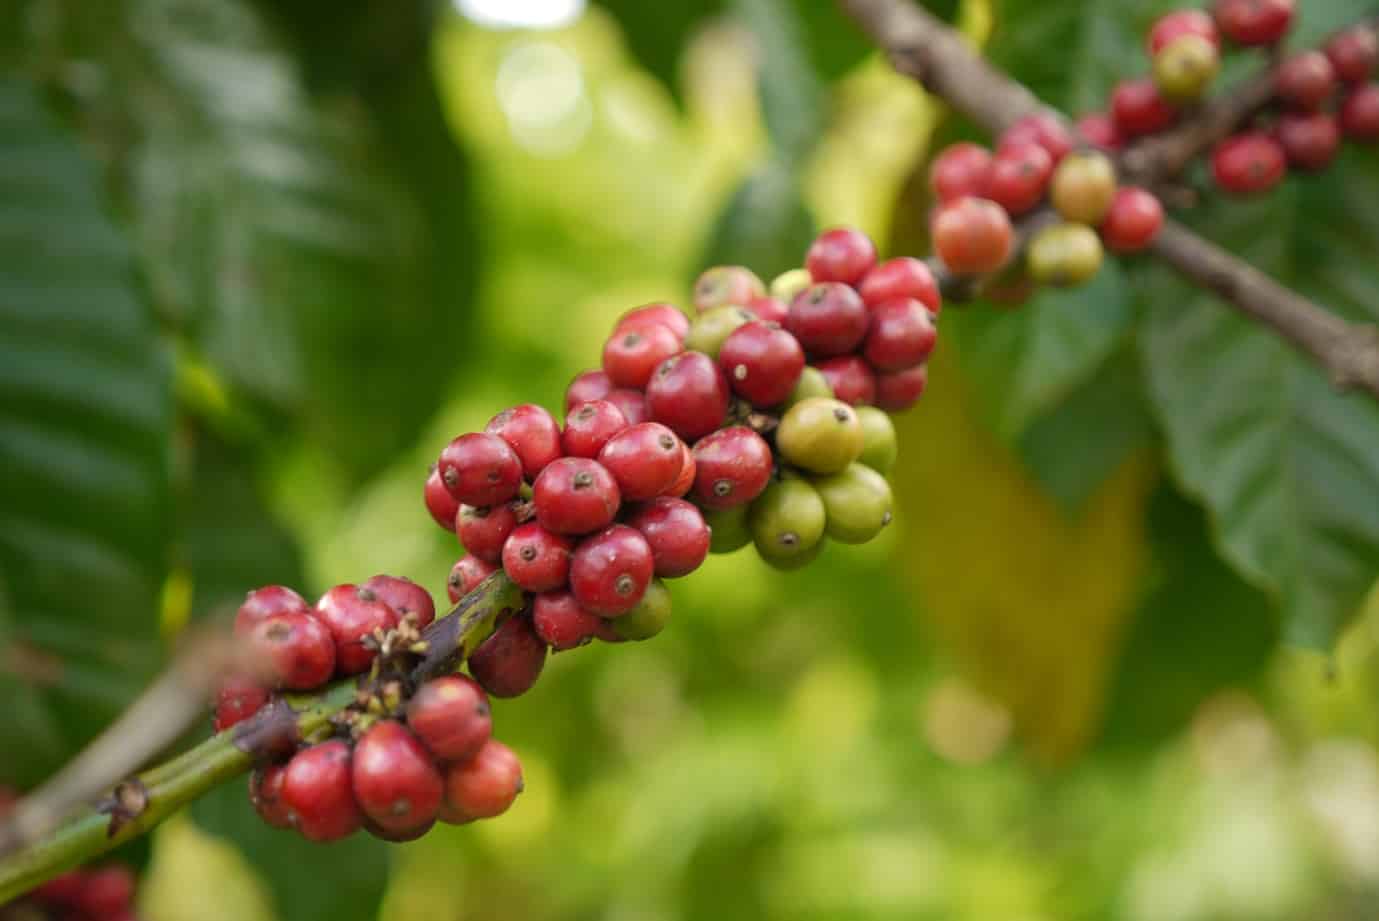 The-coffee-plantation-can-be-found-in-the-area-close-to-Kaziranga-in-the-Karbi-Anglong-region